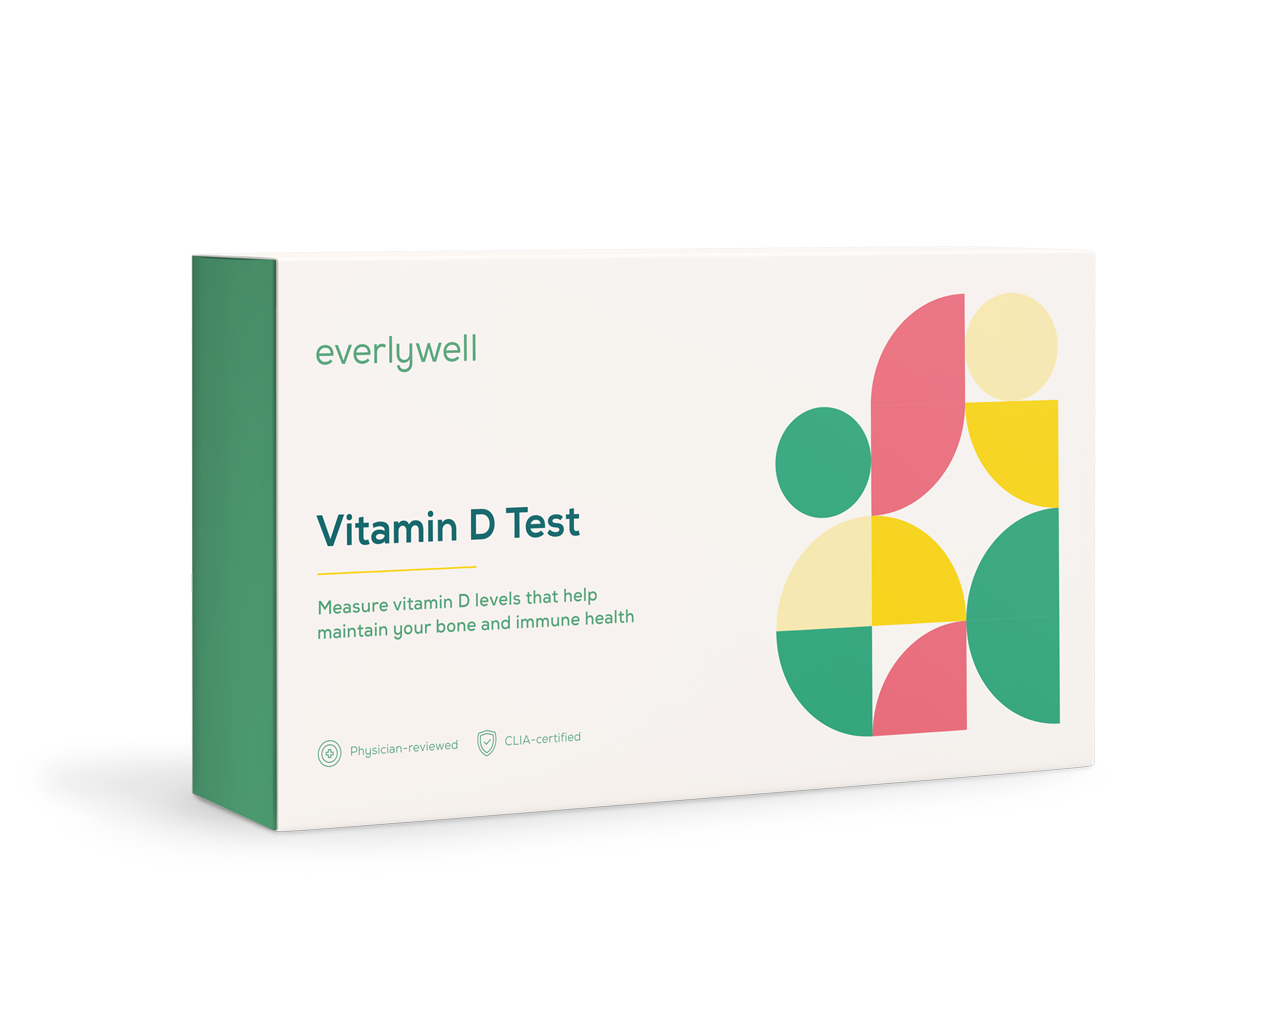 At-home Vitamin D Test for vitamin D deficiency